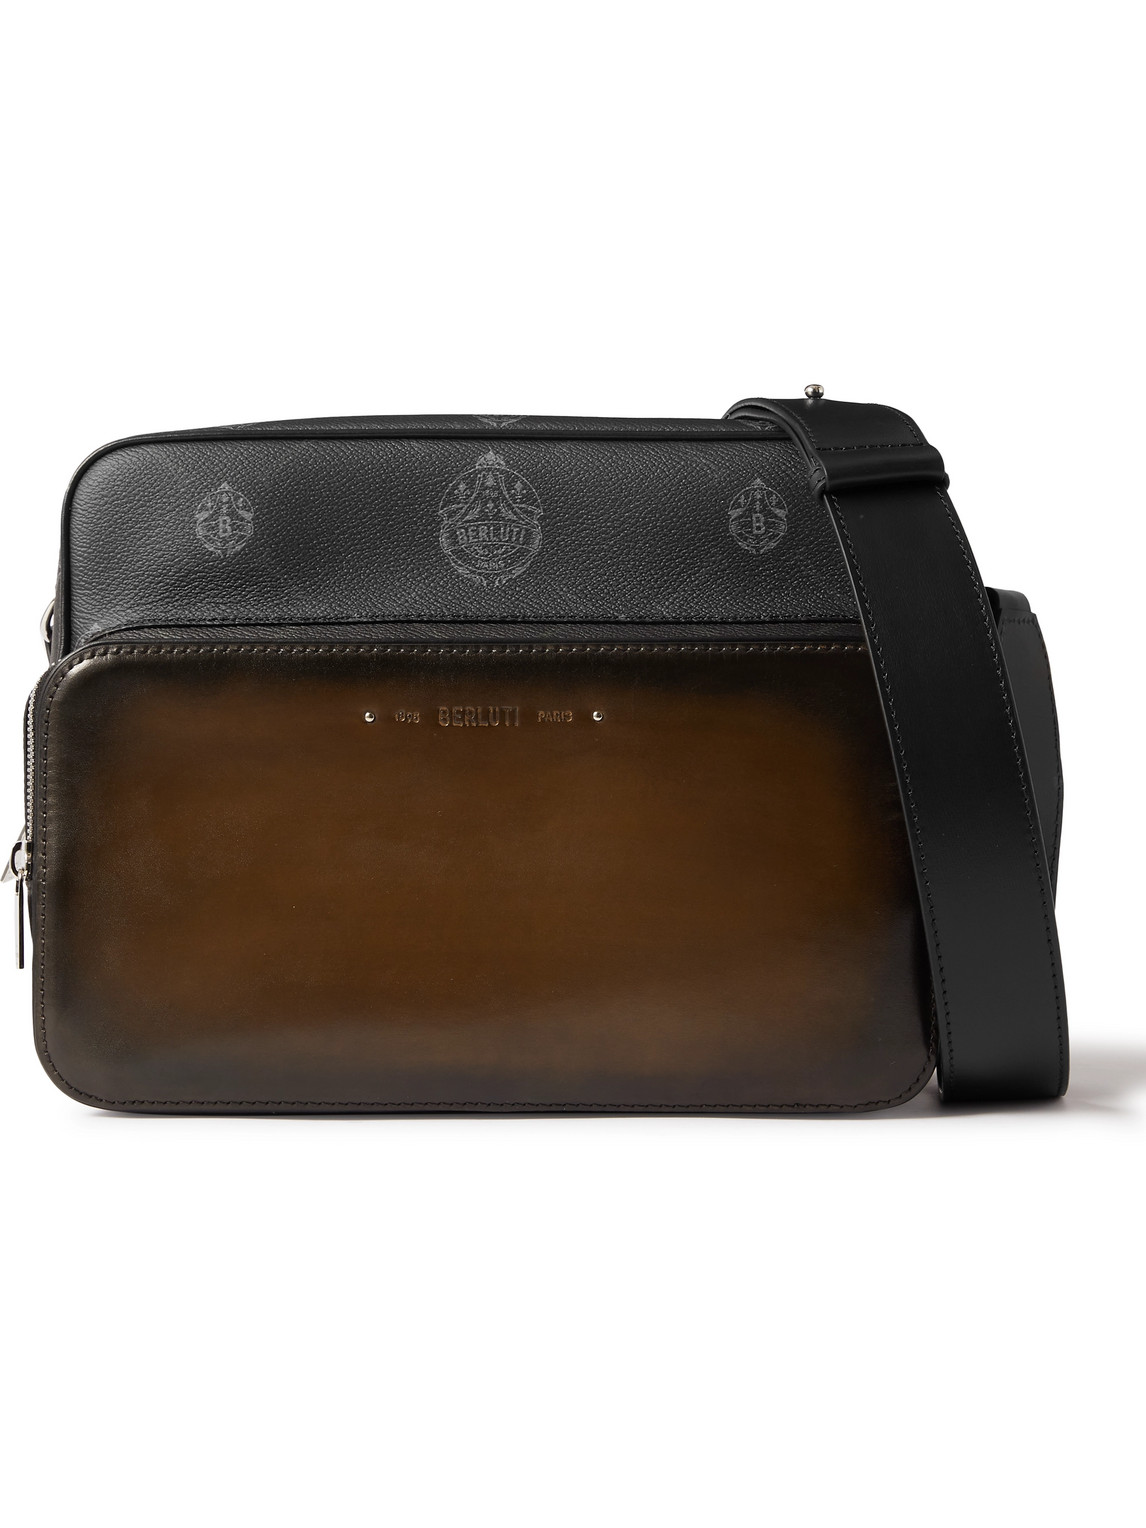 Berluti Signature Canvas And Leather Messenger Bag In Black